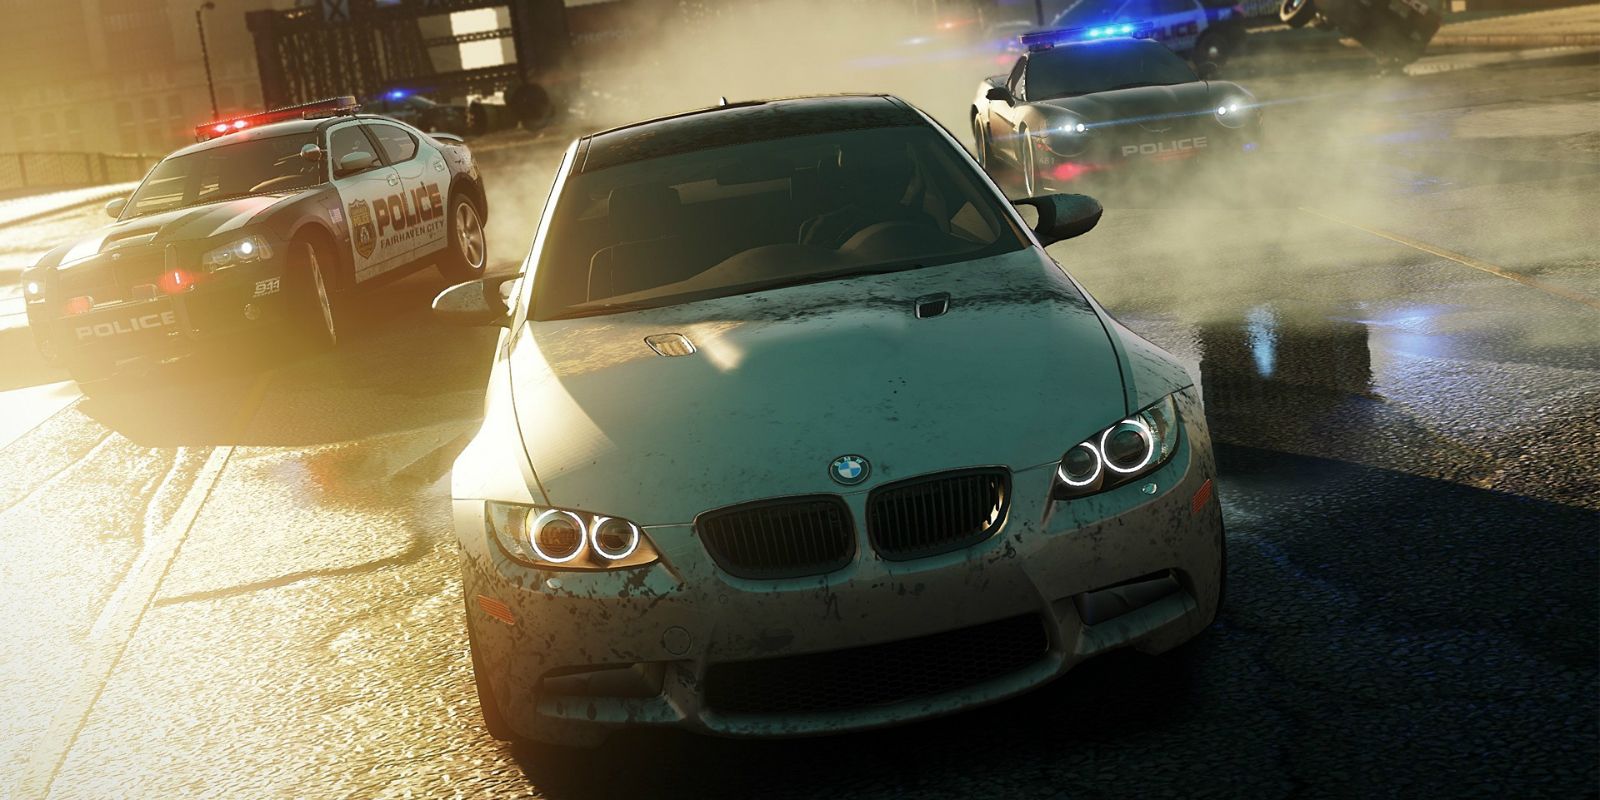 A BMW gets chased by the Police in Need For Speed Most Wanted